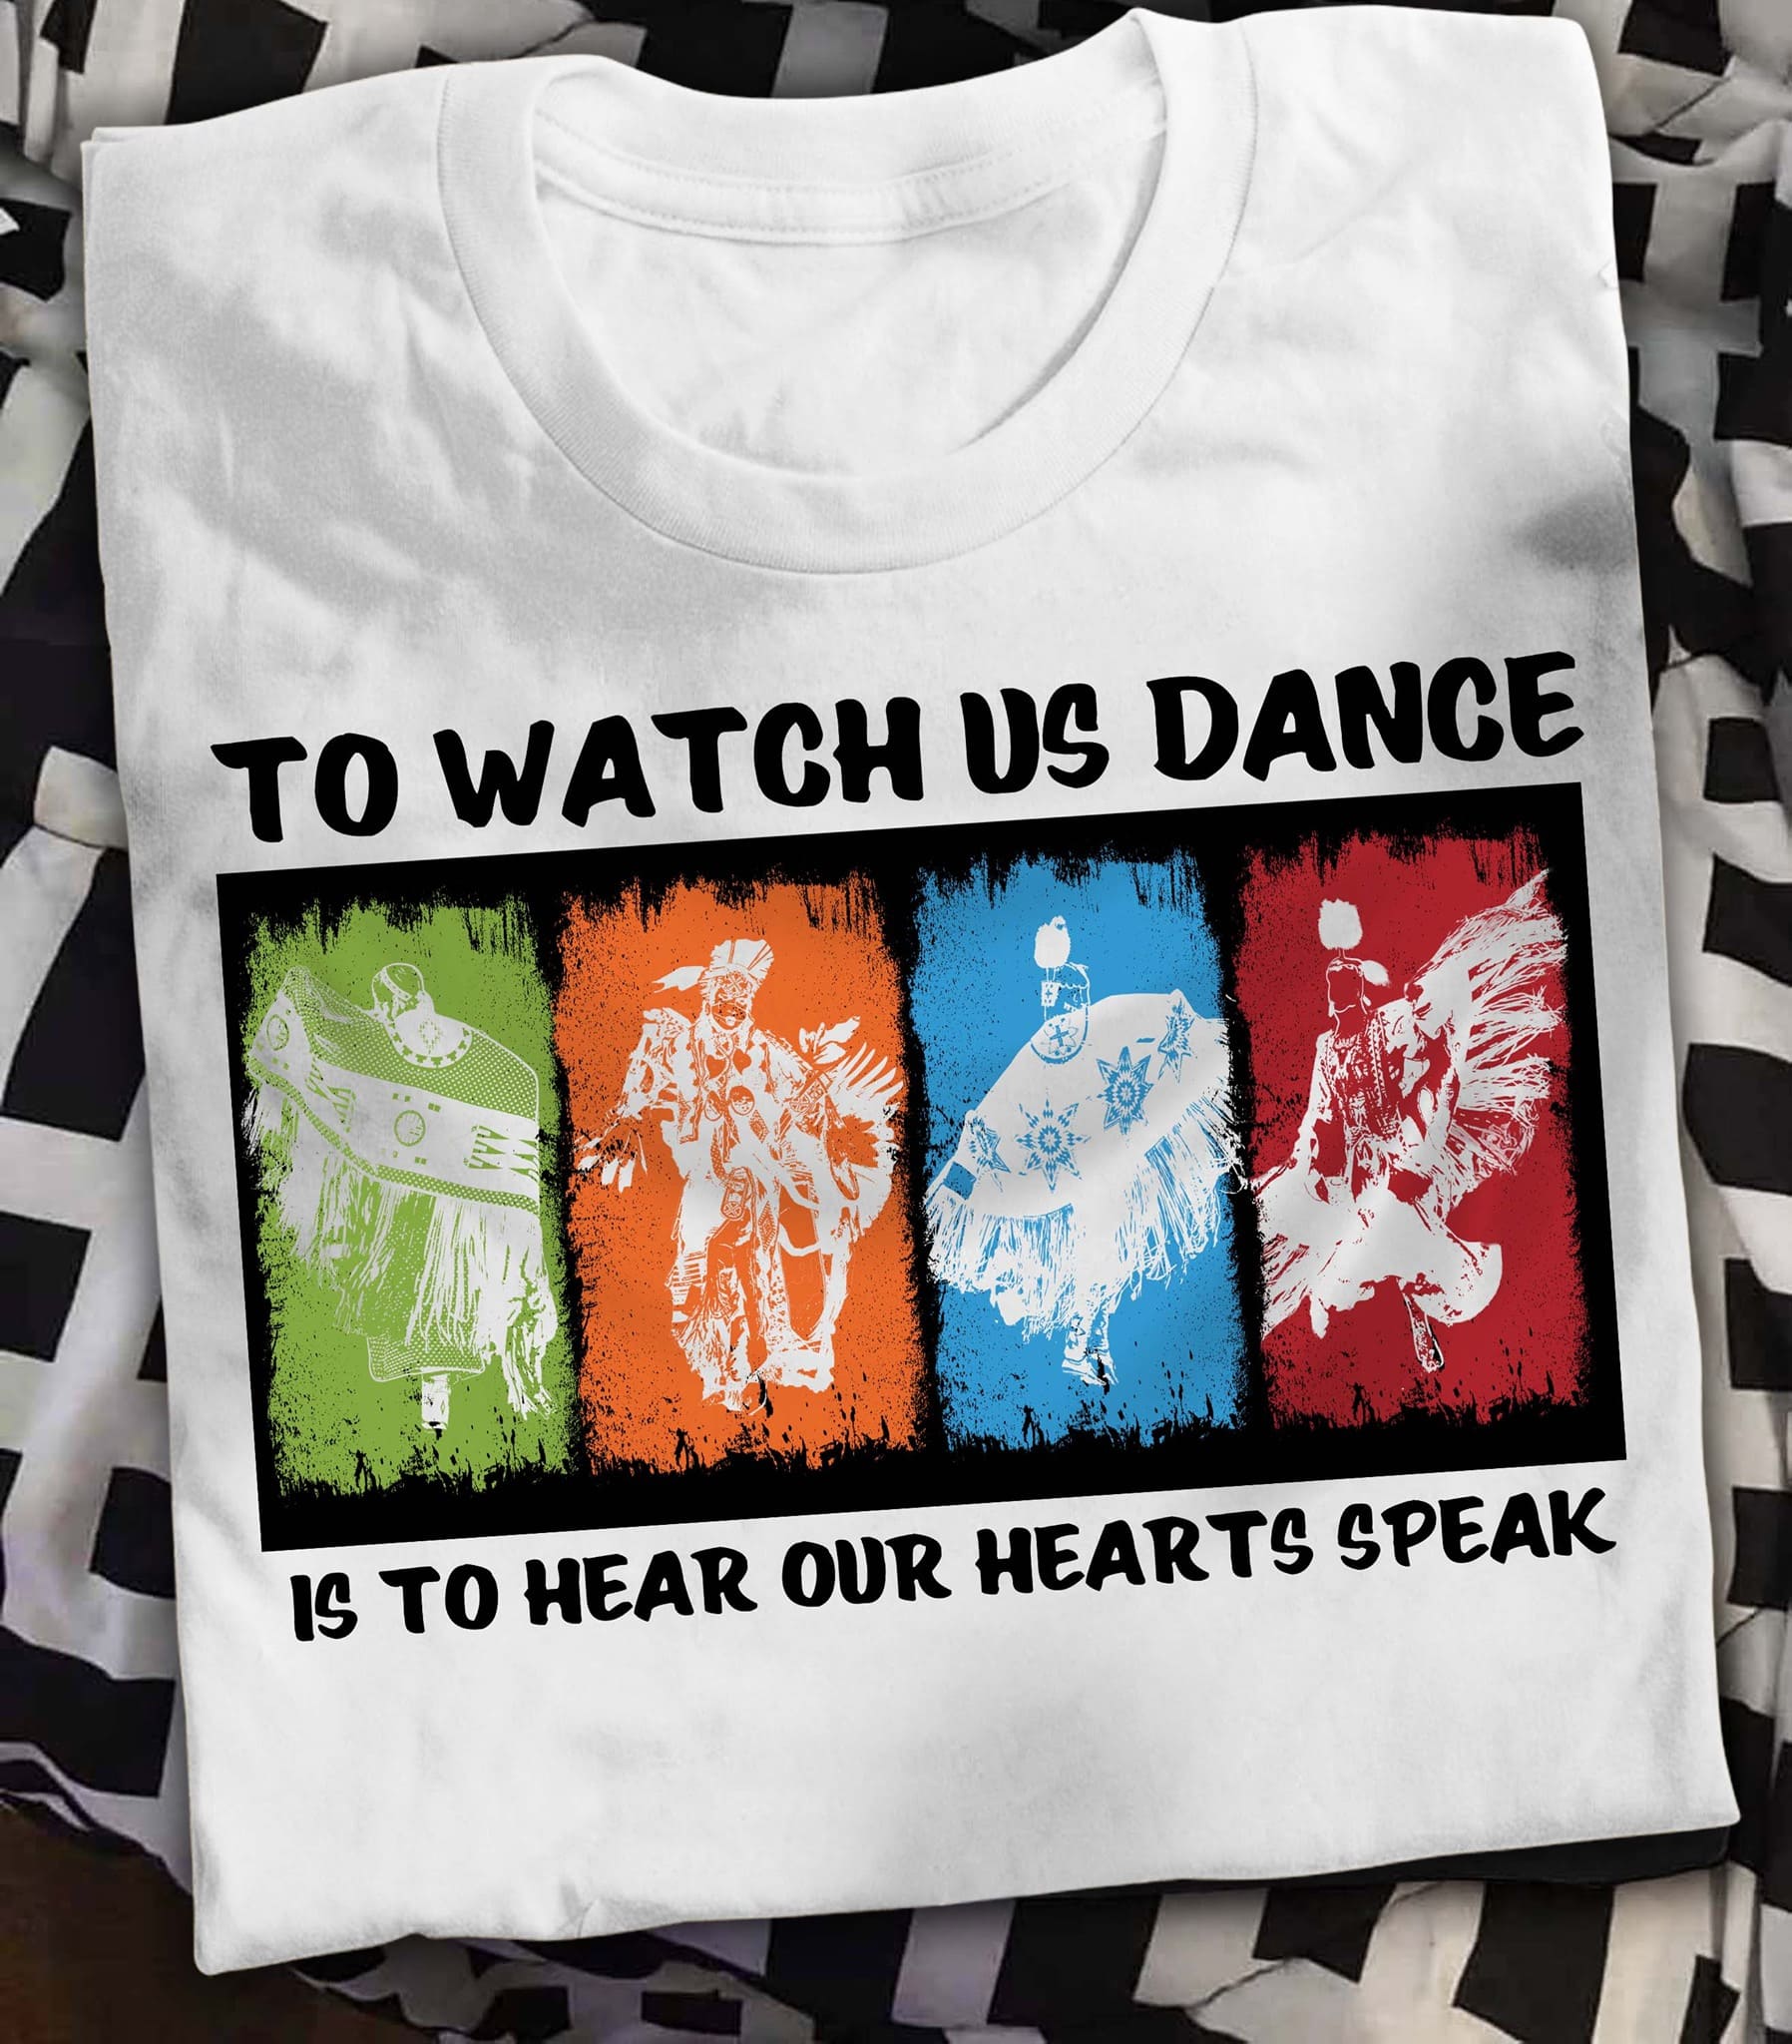 Native Person Dacing - To watch us dance is to hear our hearts speak